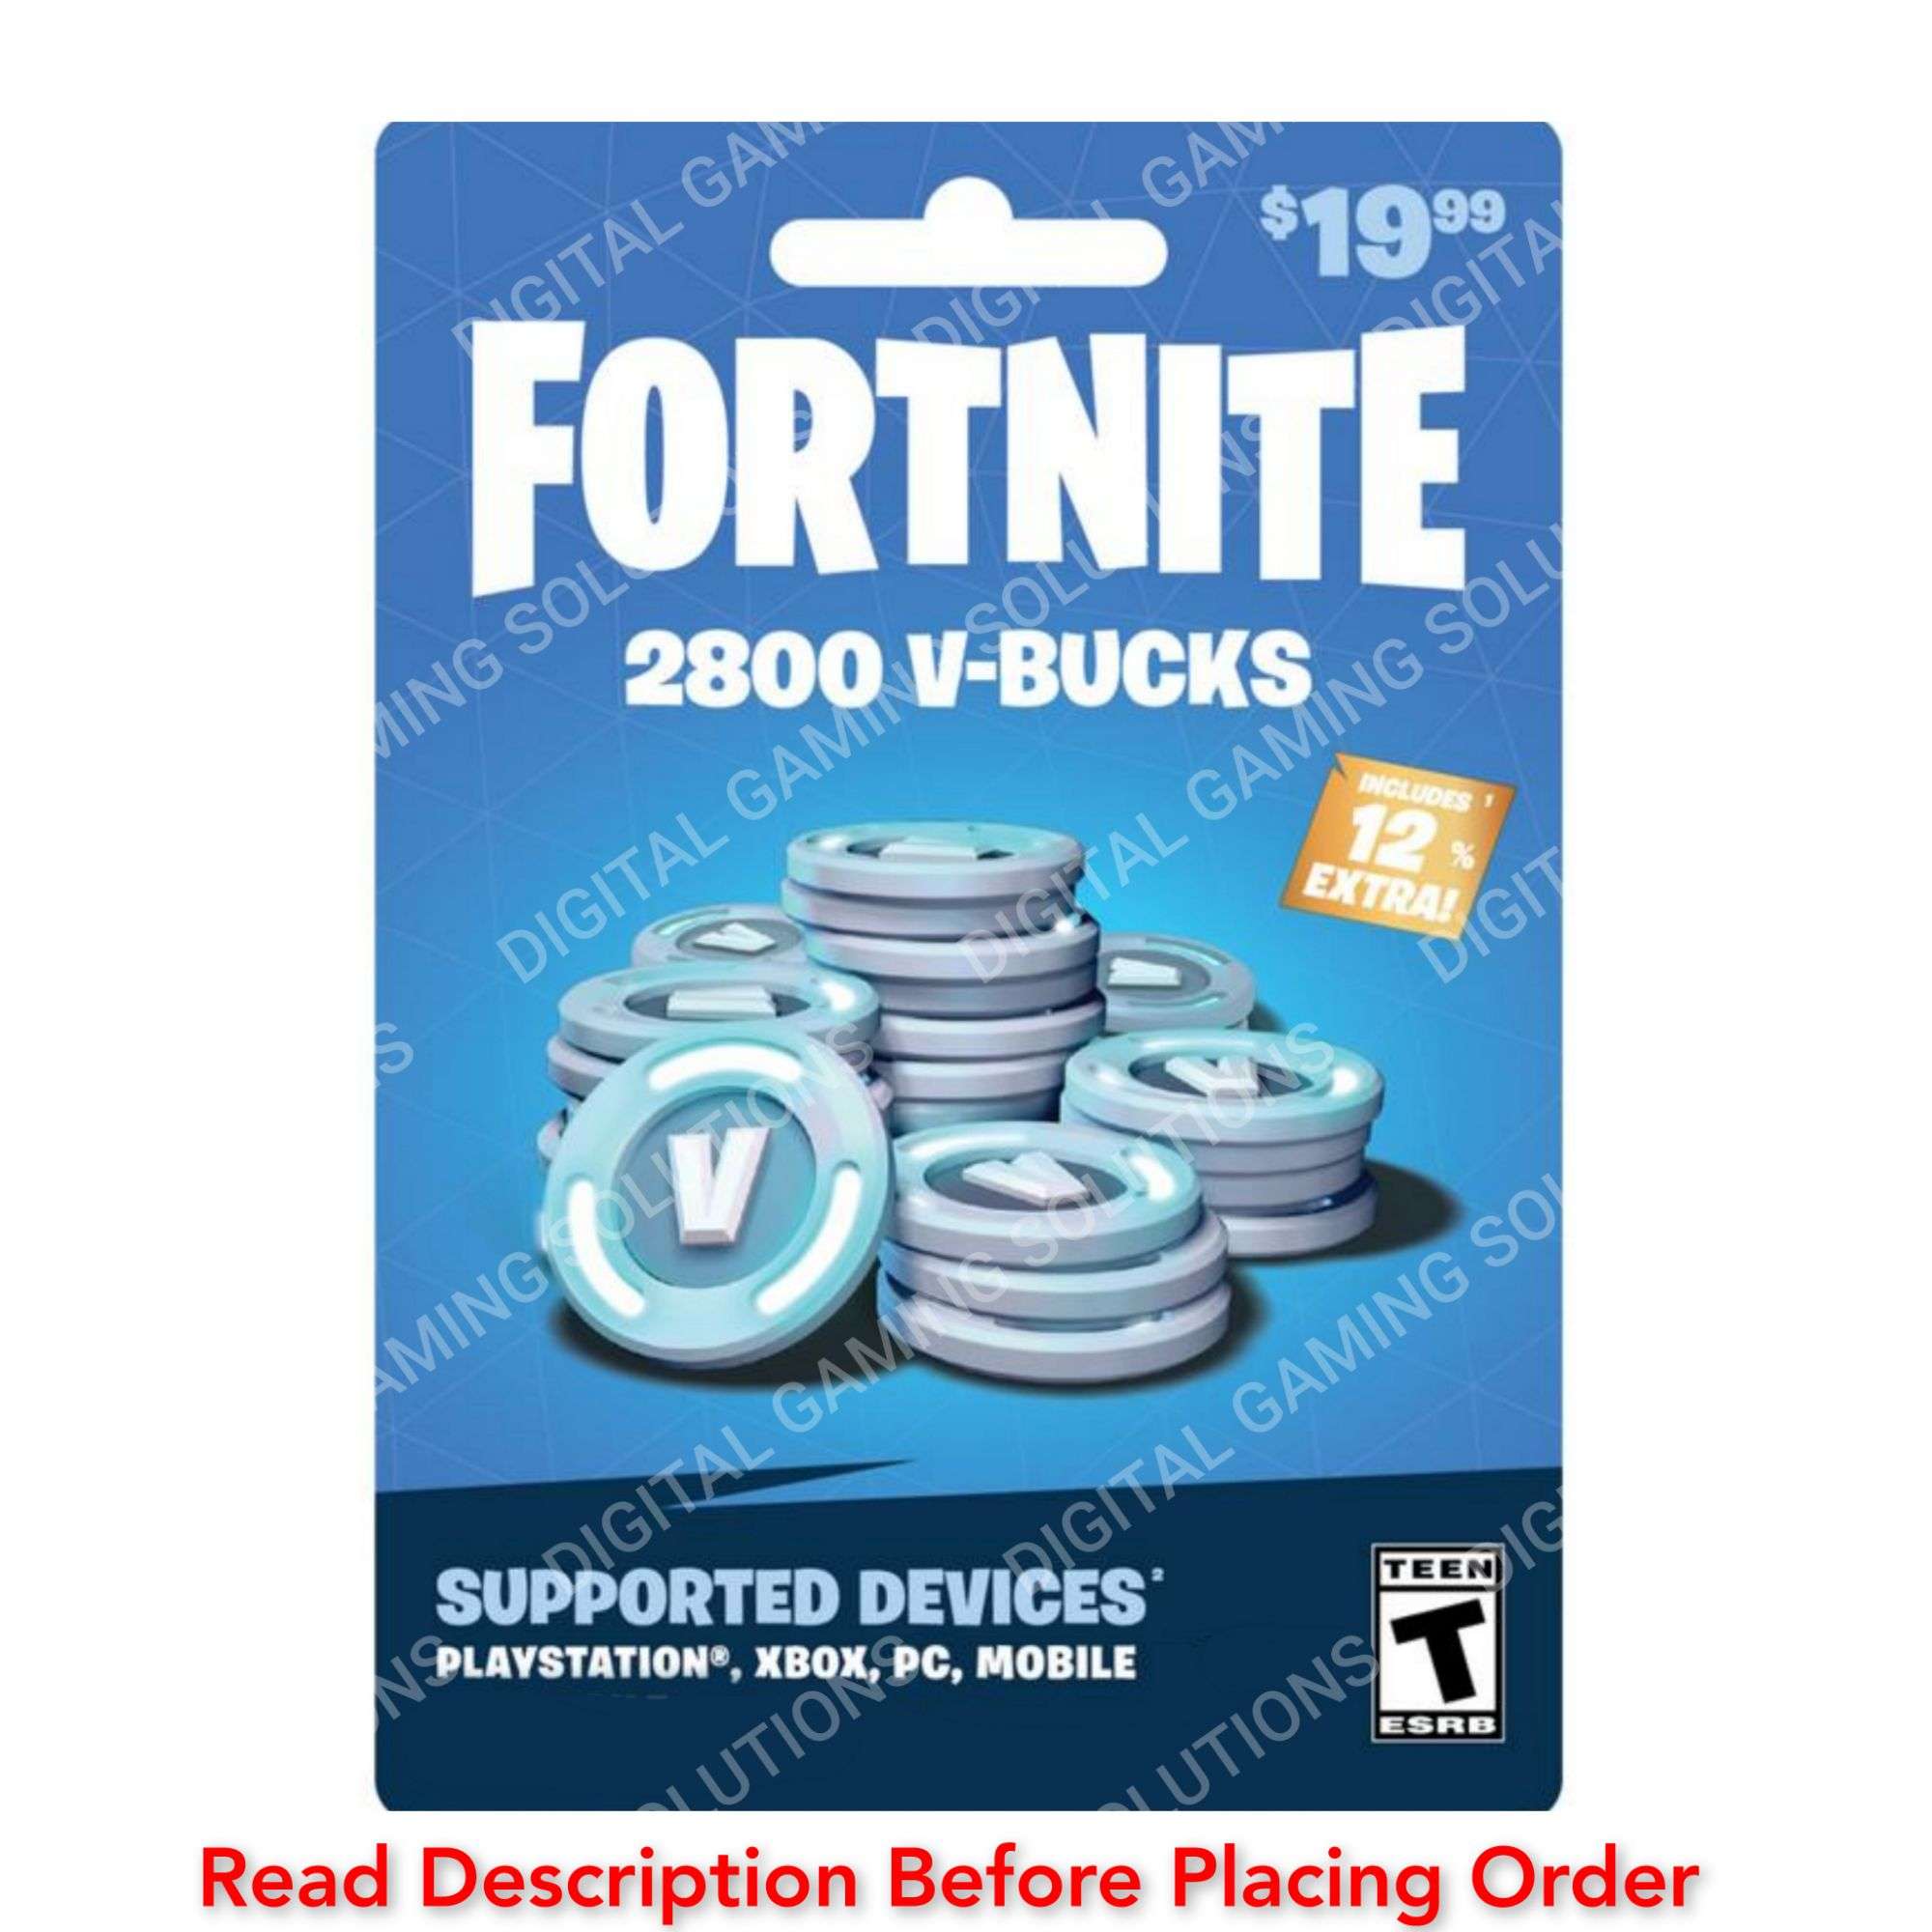 Buy Roblox Gifts Cards at Best Price in Pakistan - (March, 2023) 